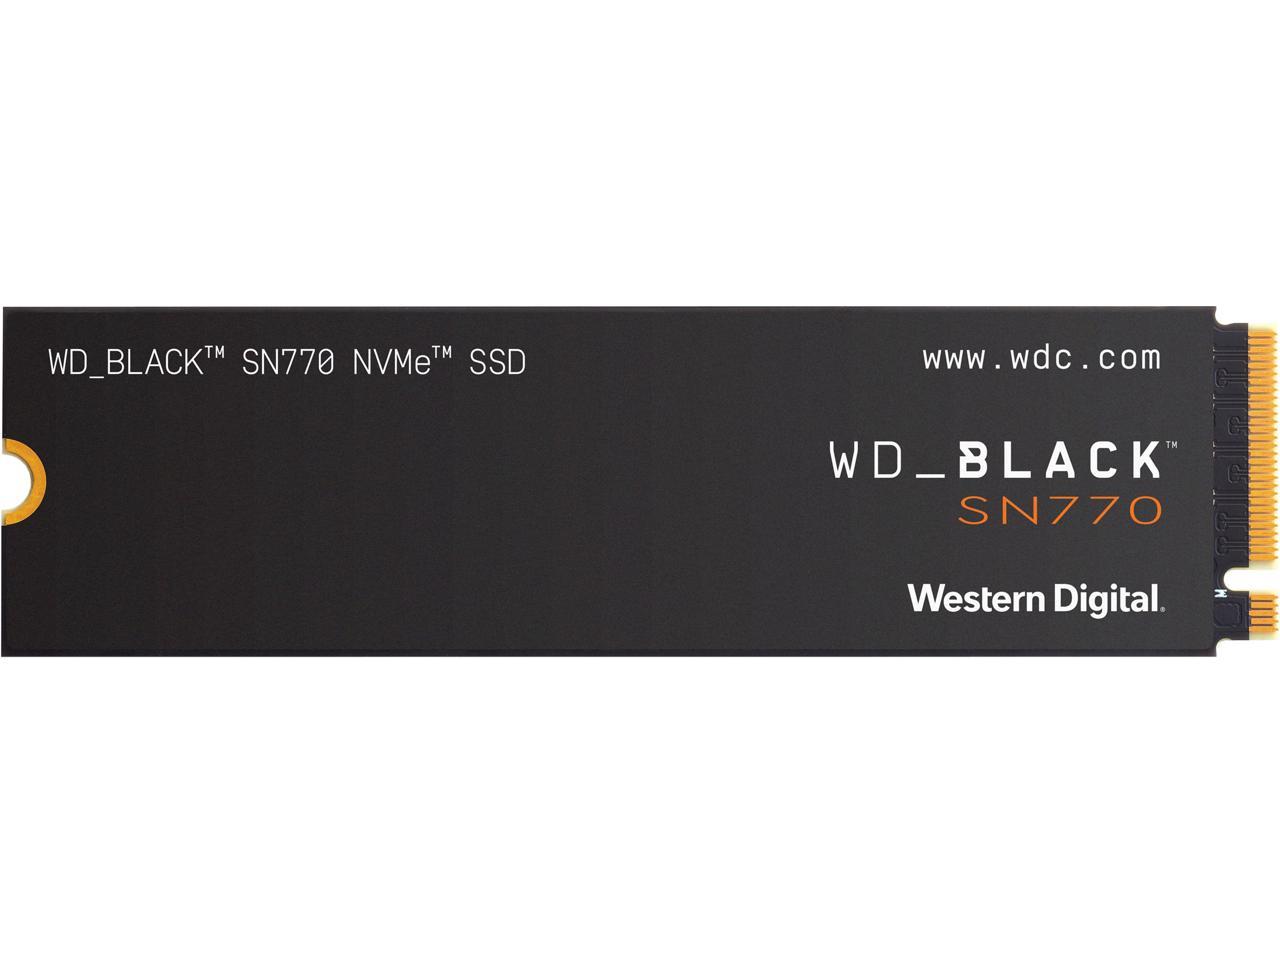 Review of the WD Black SN770 NVMe SSD